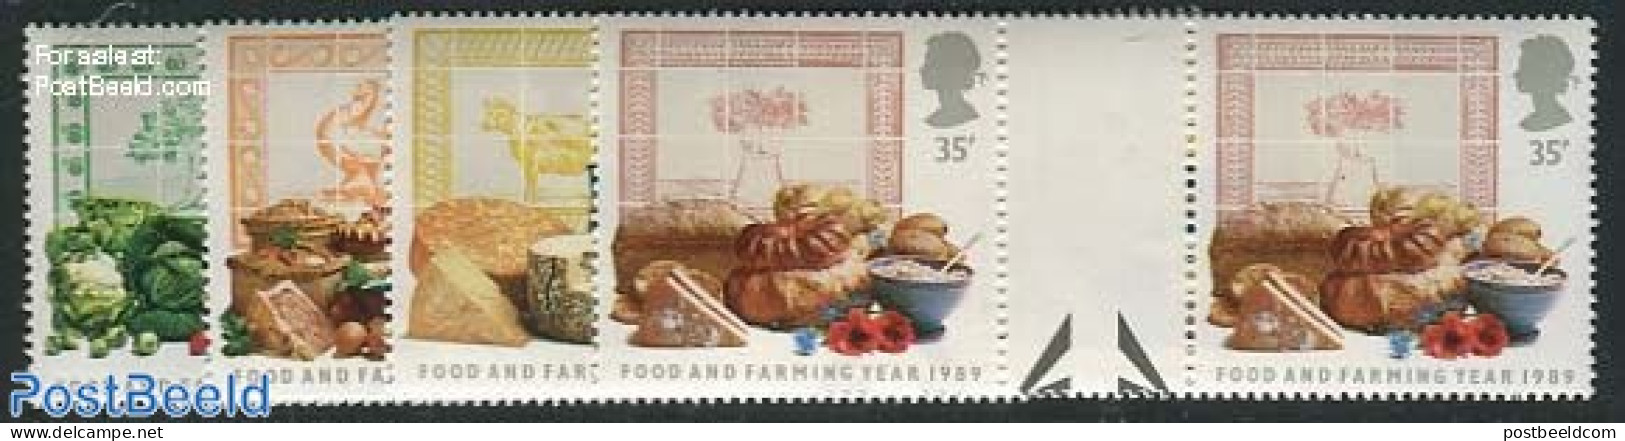 Great Britain 1989 Food And Farming Year 4v, Gutter Pairs, Mint NH, Health - Bread & Baking - Food & Drink - Ongebruikt